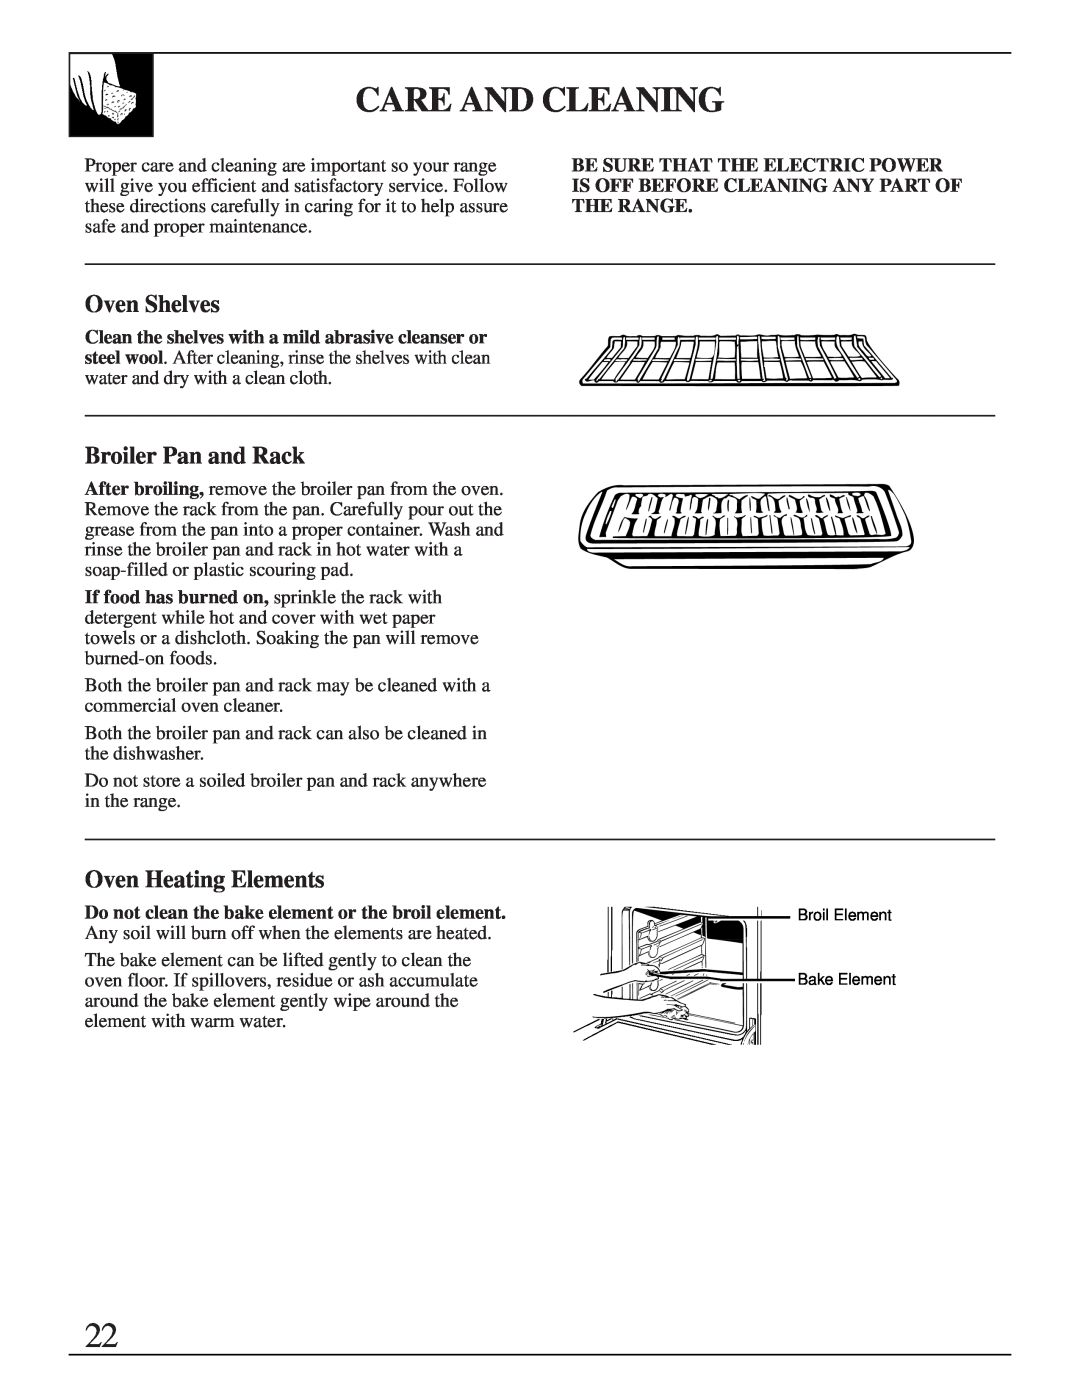 GE JMS10 warranty Care And Cleaning, Broiler Pan and Rack, Oven Heating Elements, Oven Shelves 